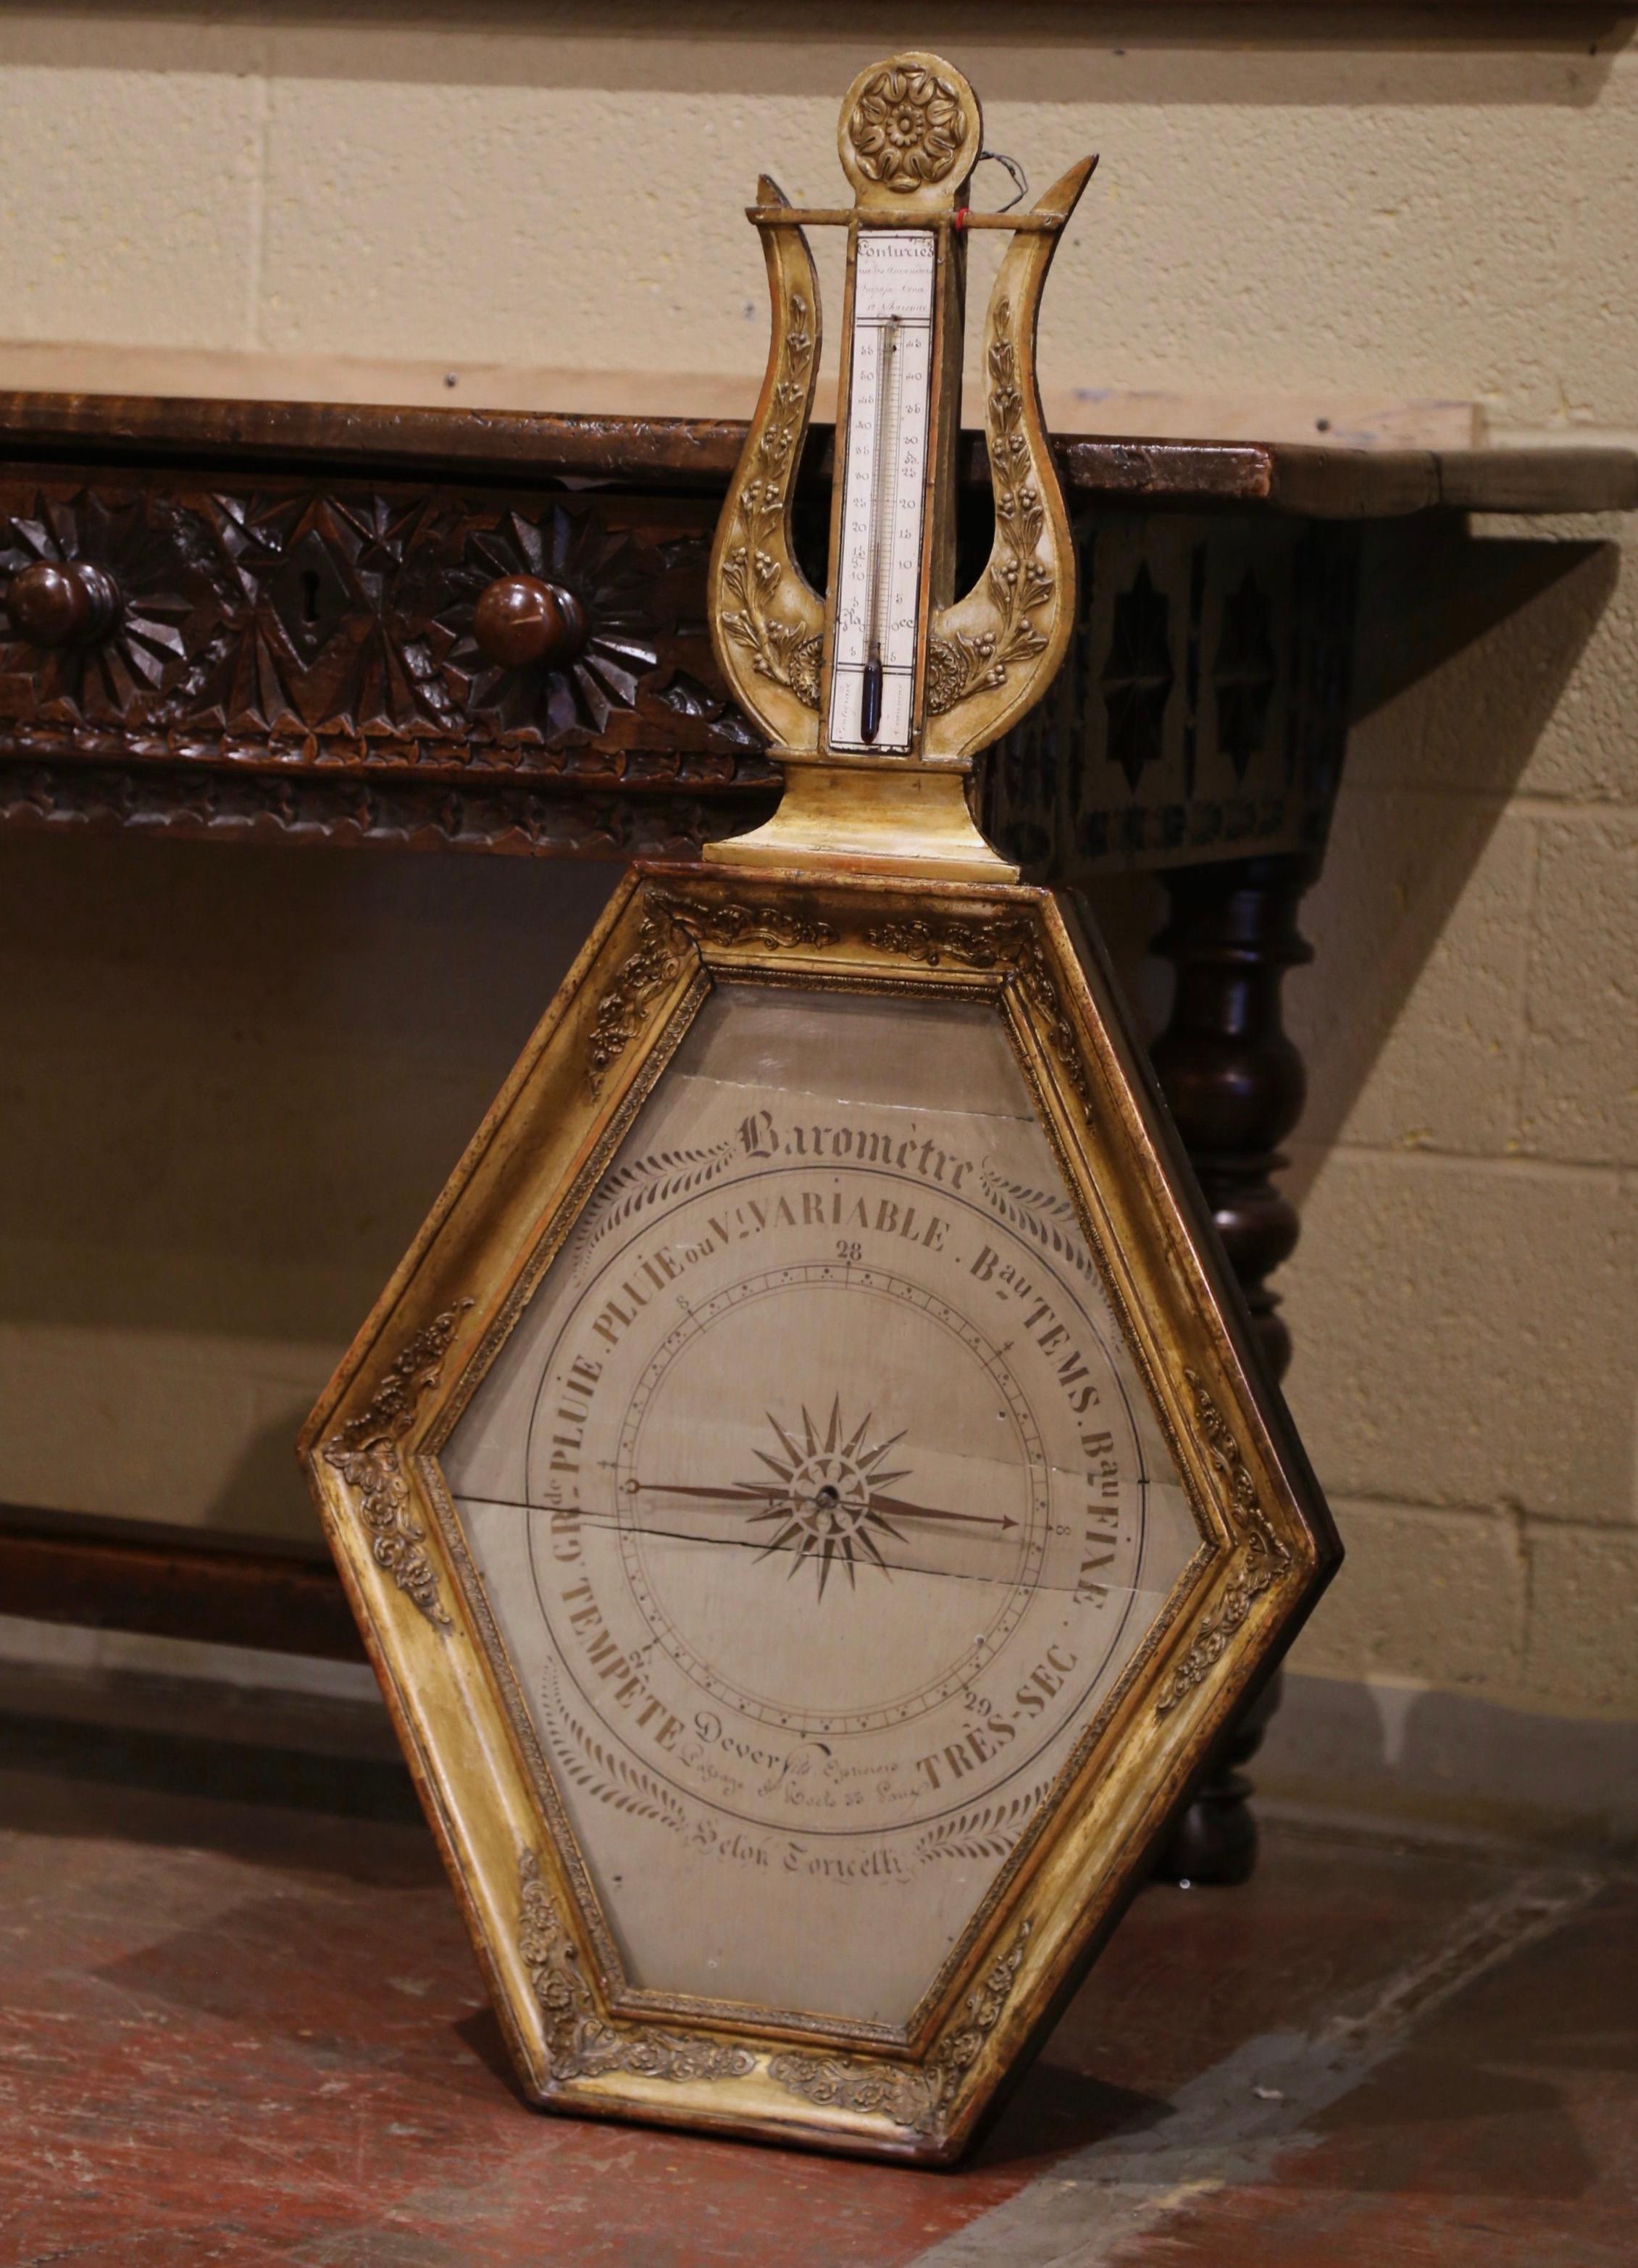 Decorate a wall with this elegant, antique barometer with attached thermometer. Crafted in Paris, France, circa 1760 and hexagonal in shape, the scientific instrument features its original hand painted parchment paper with French inscriptions